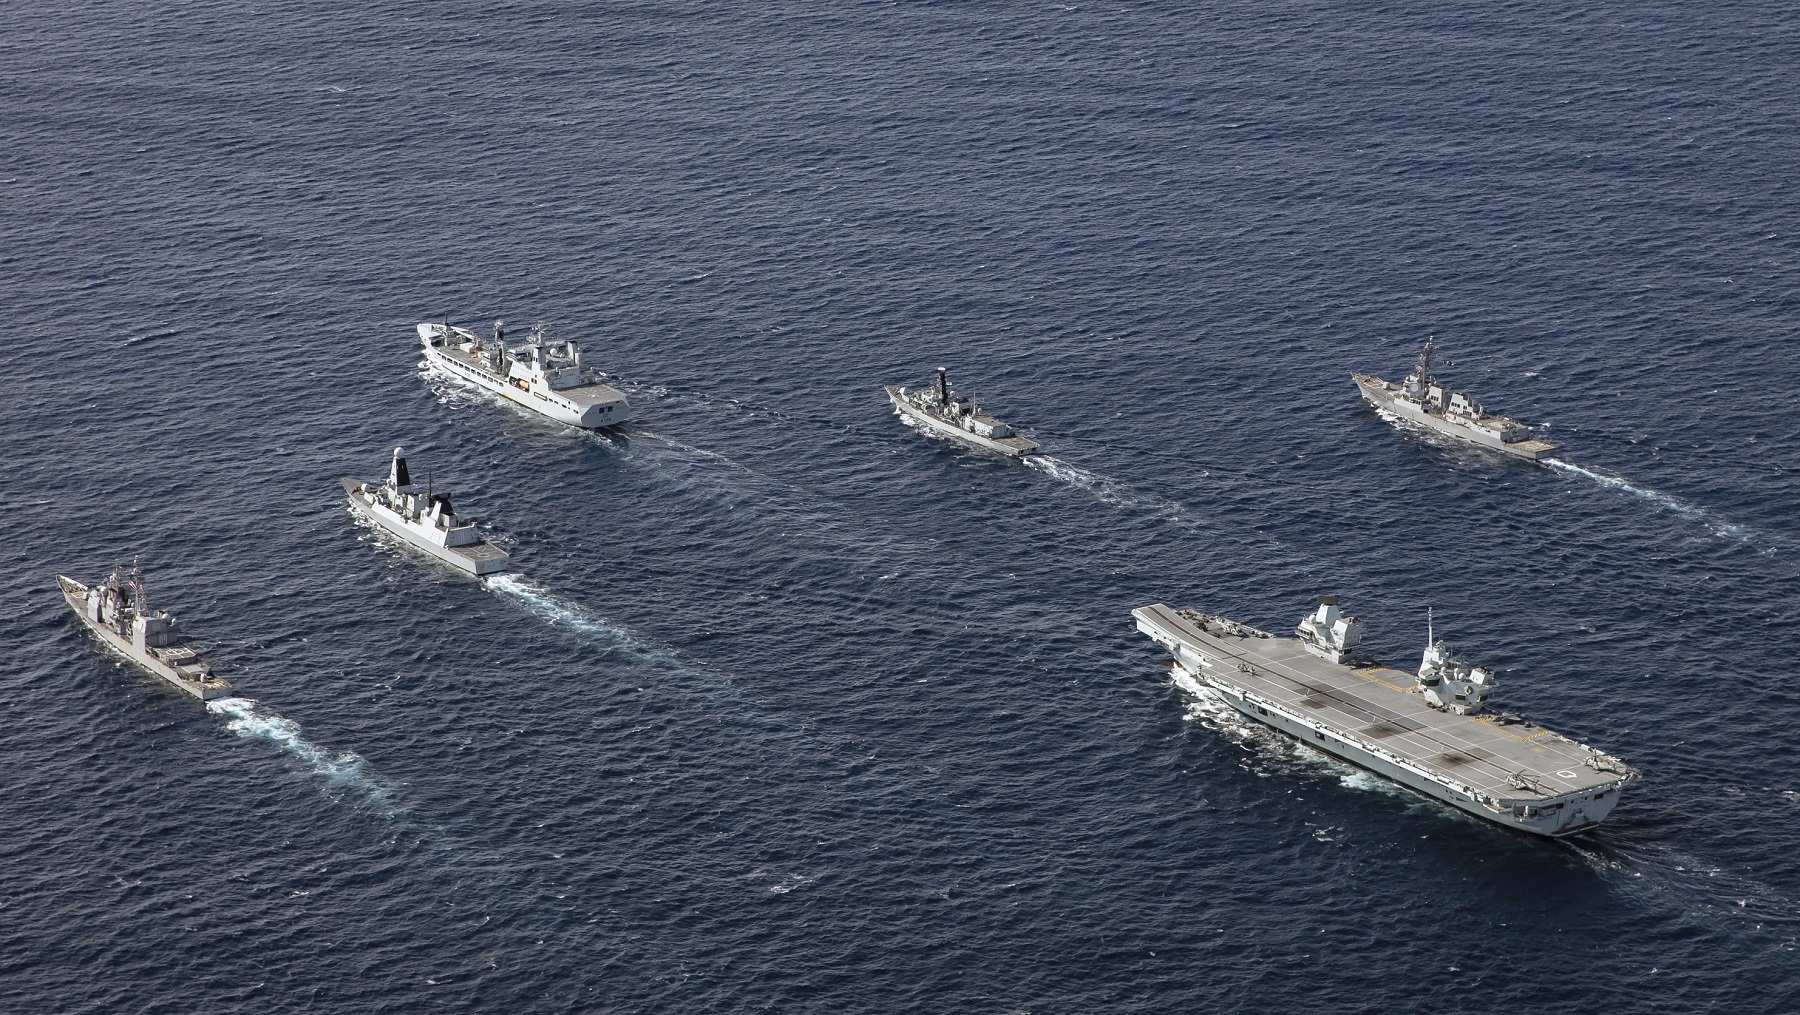 HMS Queen Elizabeth in formation with her Carrier Strike Group. The Carrier Strike Group comprises RFA Tideforce in the lead with HMS Northumberland (her right), USS Truxtun (her far right), HMS Dragon (her left), USS Philippine Sea (her far left) with HMS Queen Elizabeth at the rear.